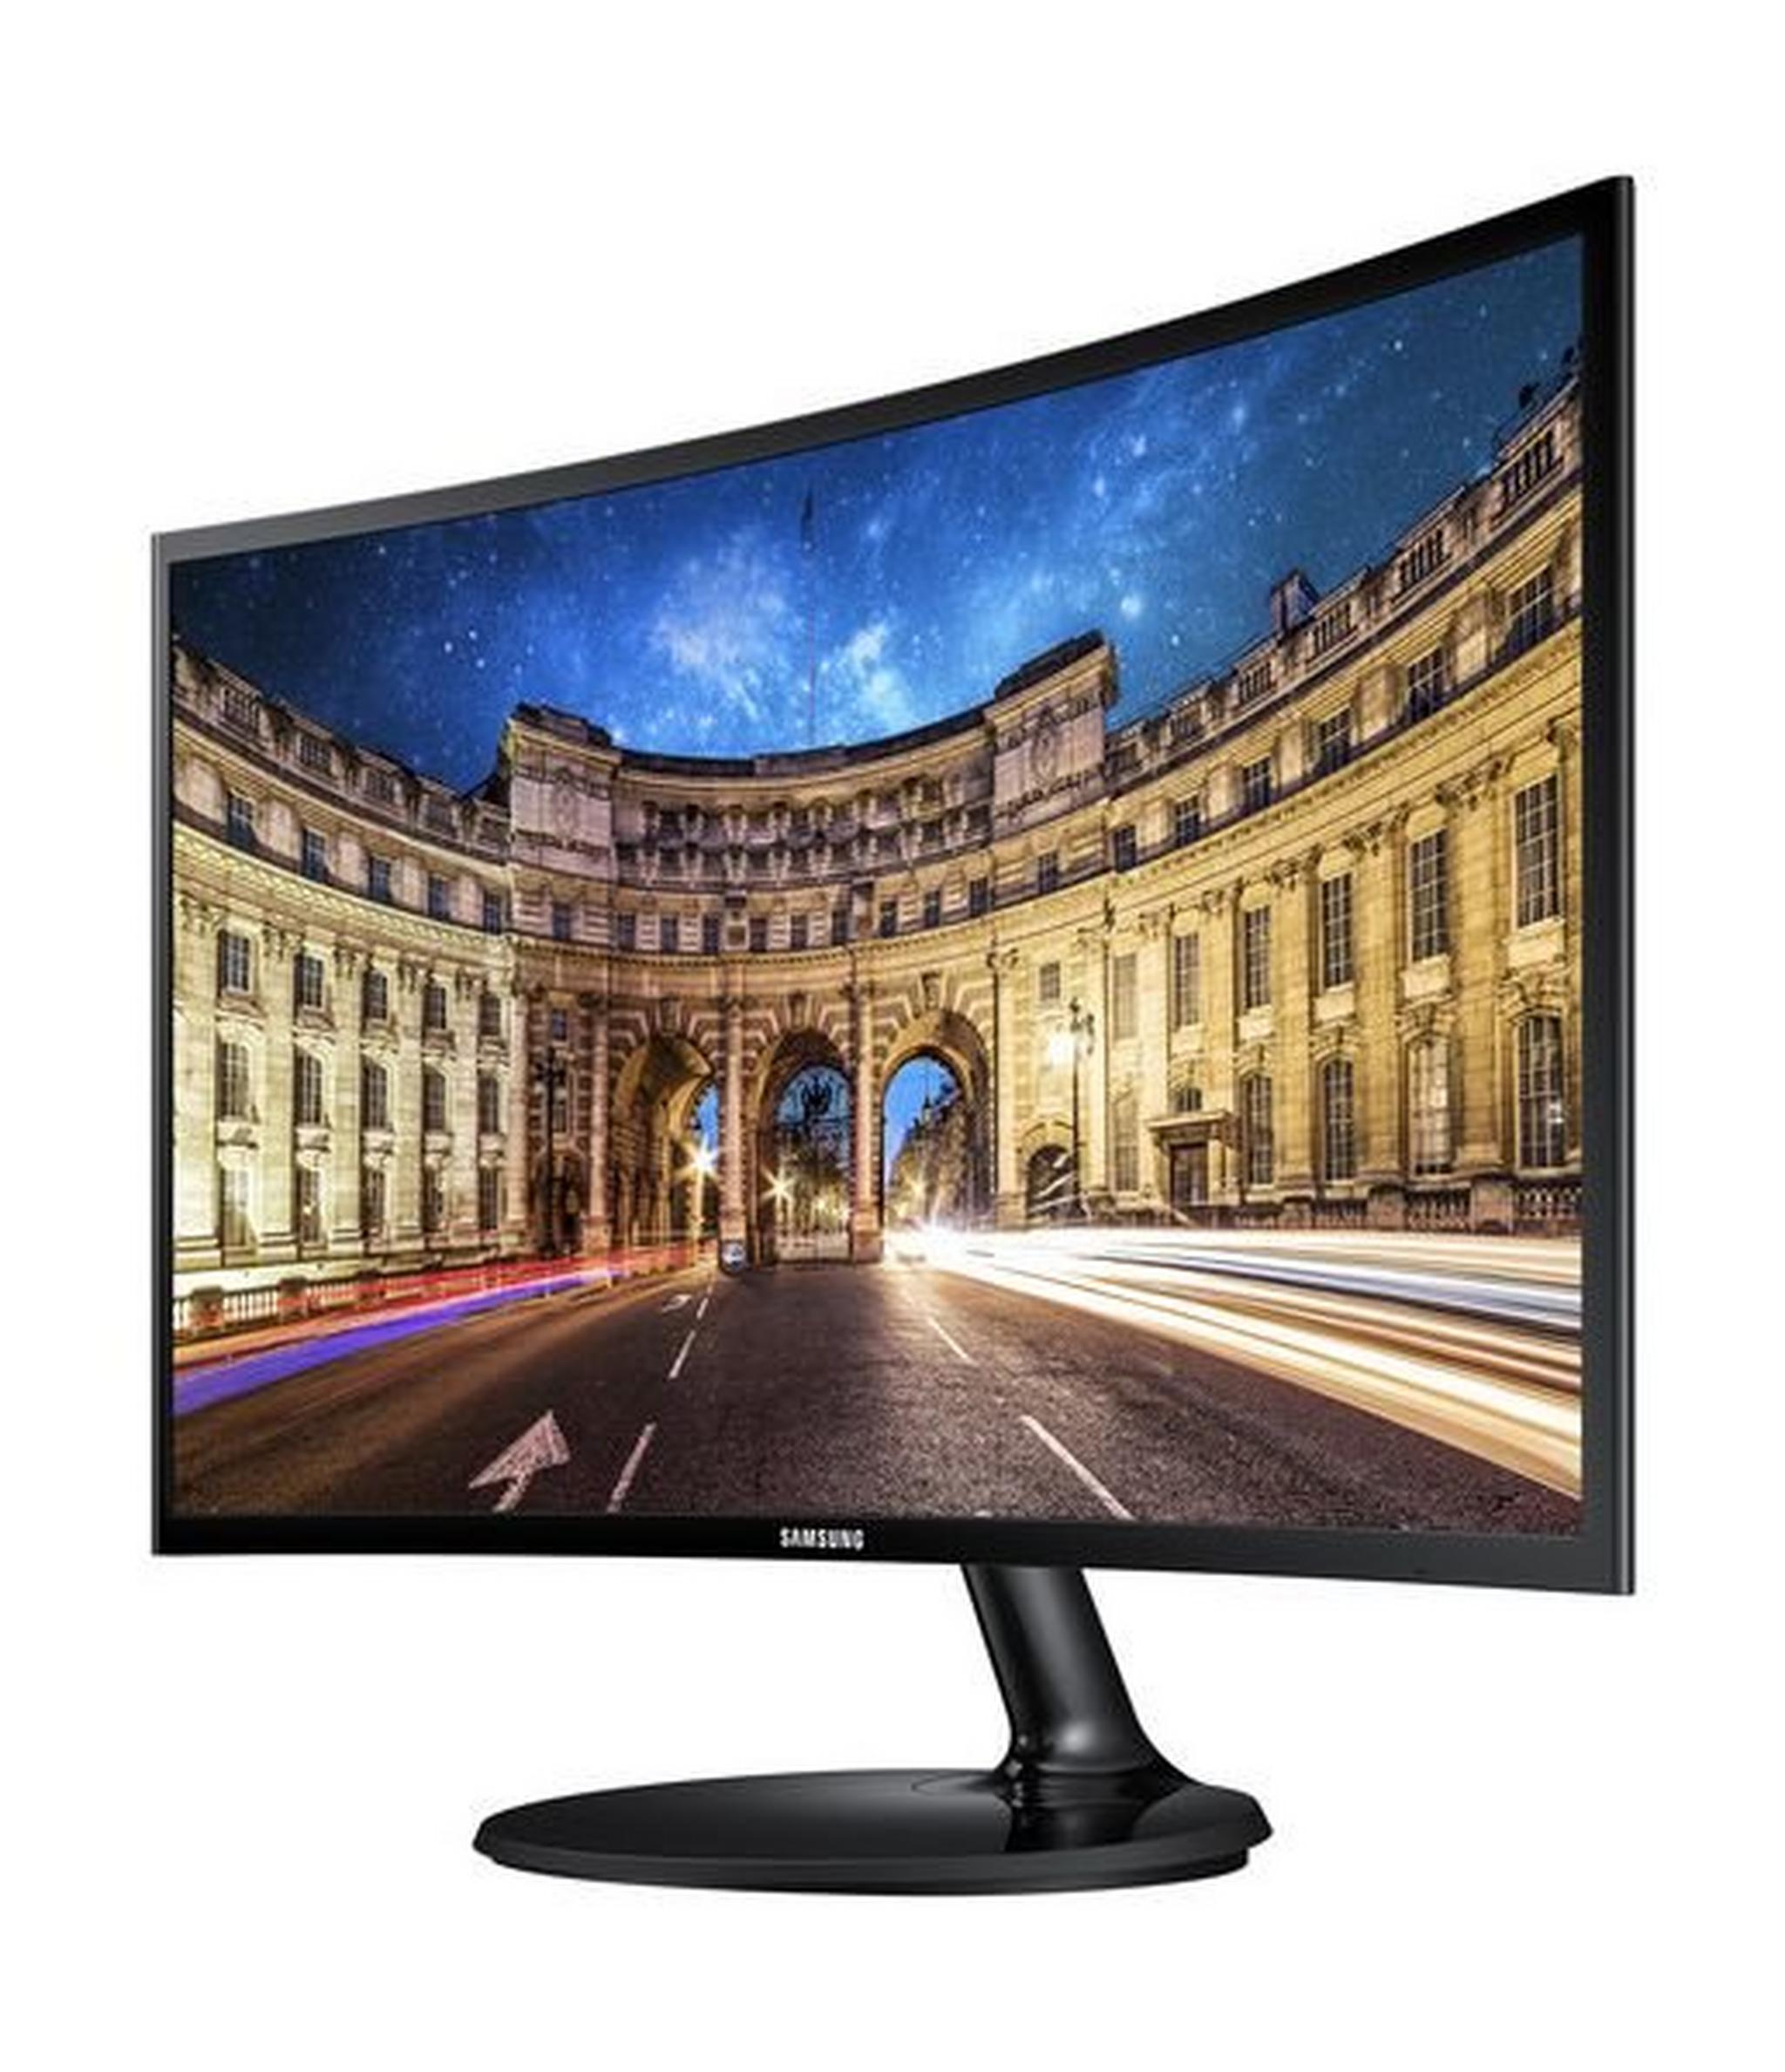 Samsung 390 Series  27-inch Full-HD Curved LED Monitor (LC27F390)